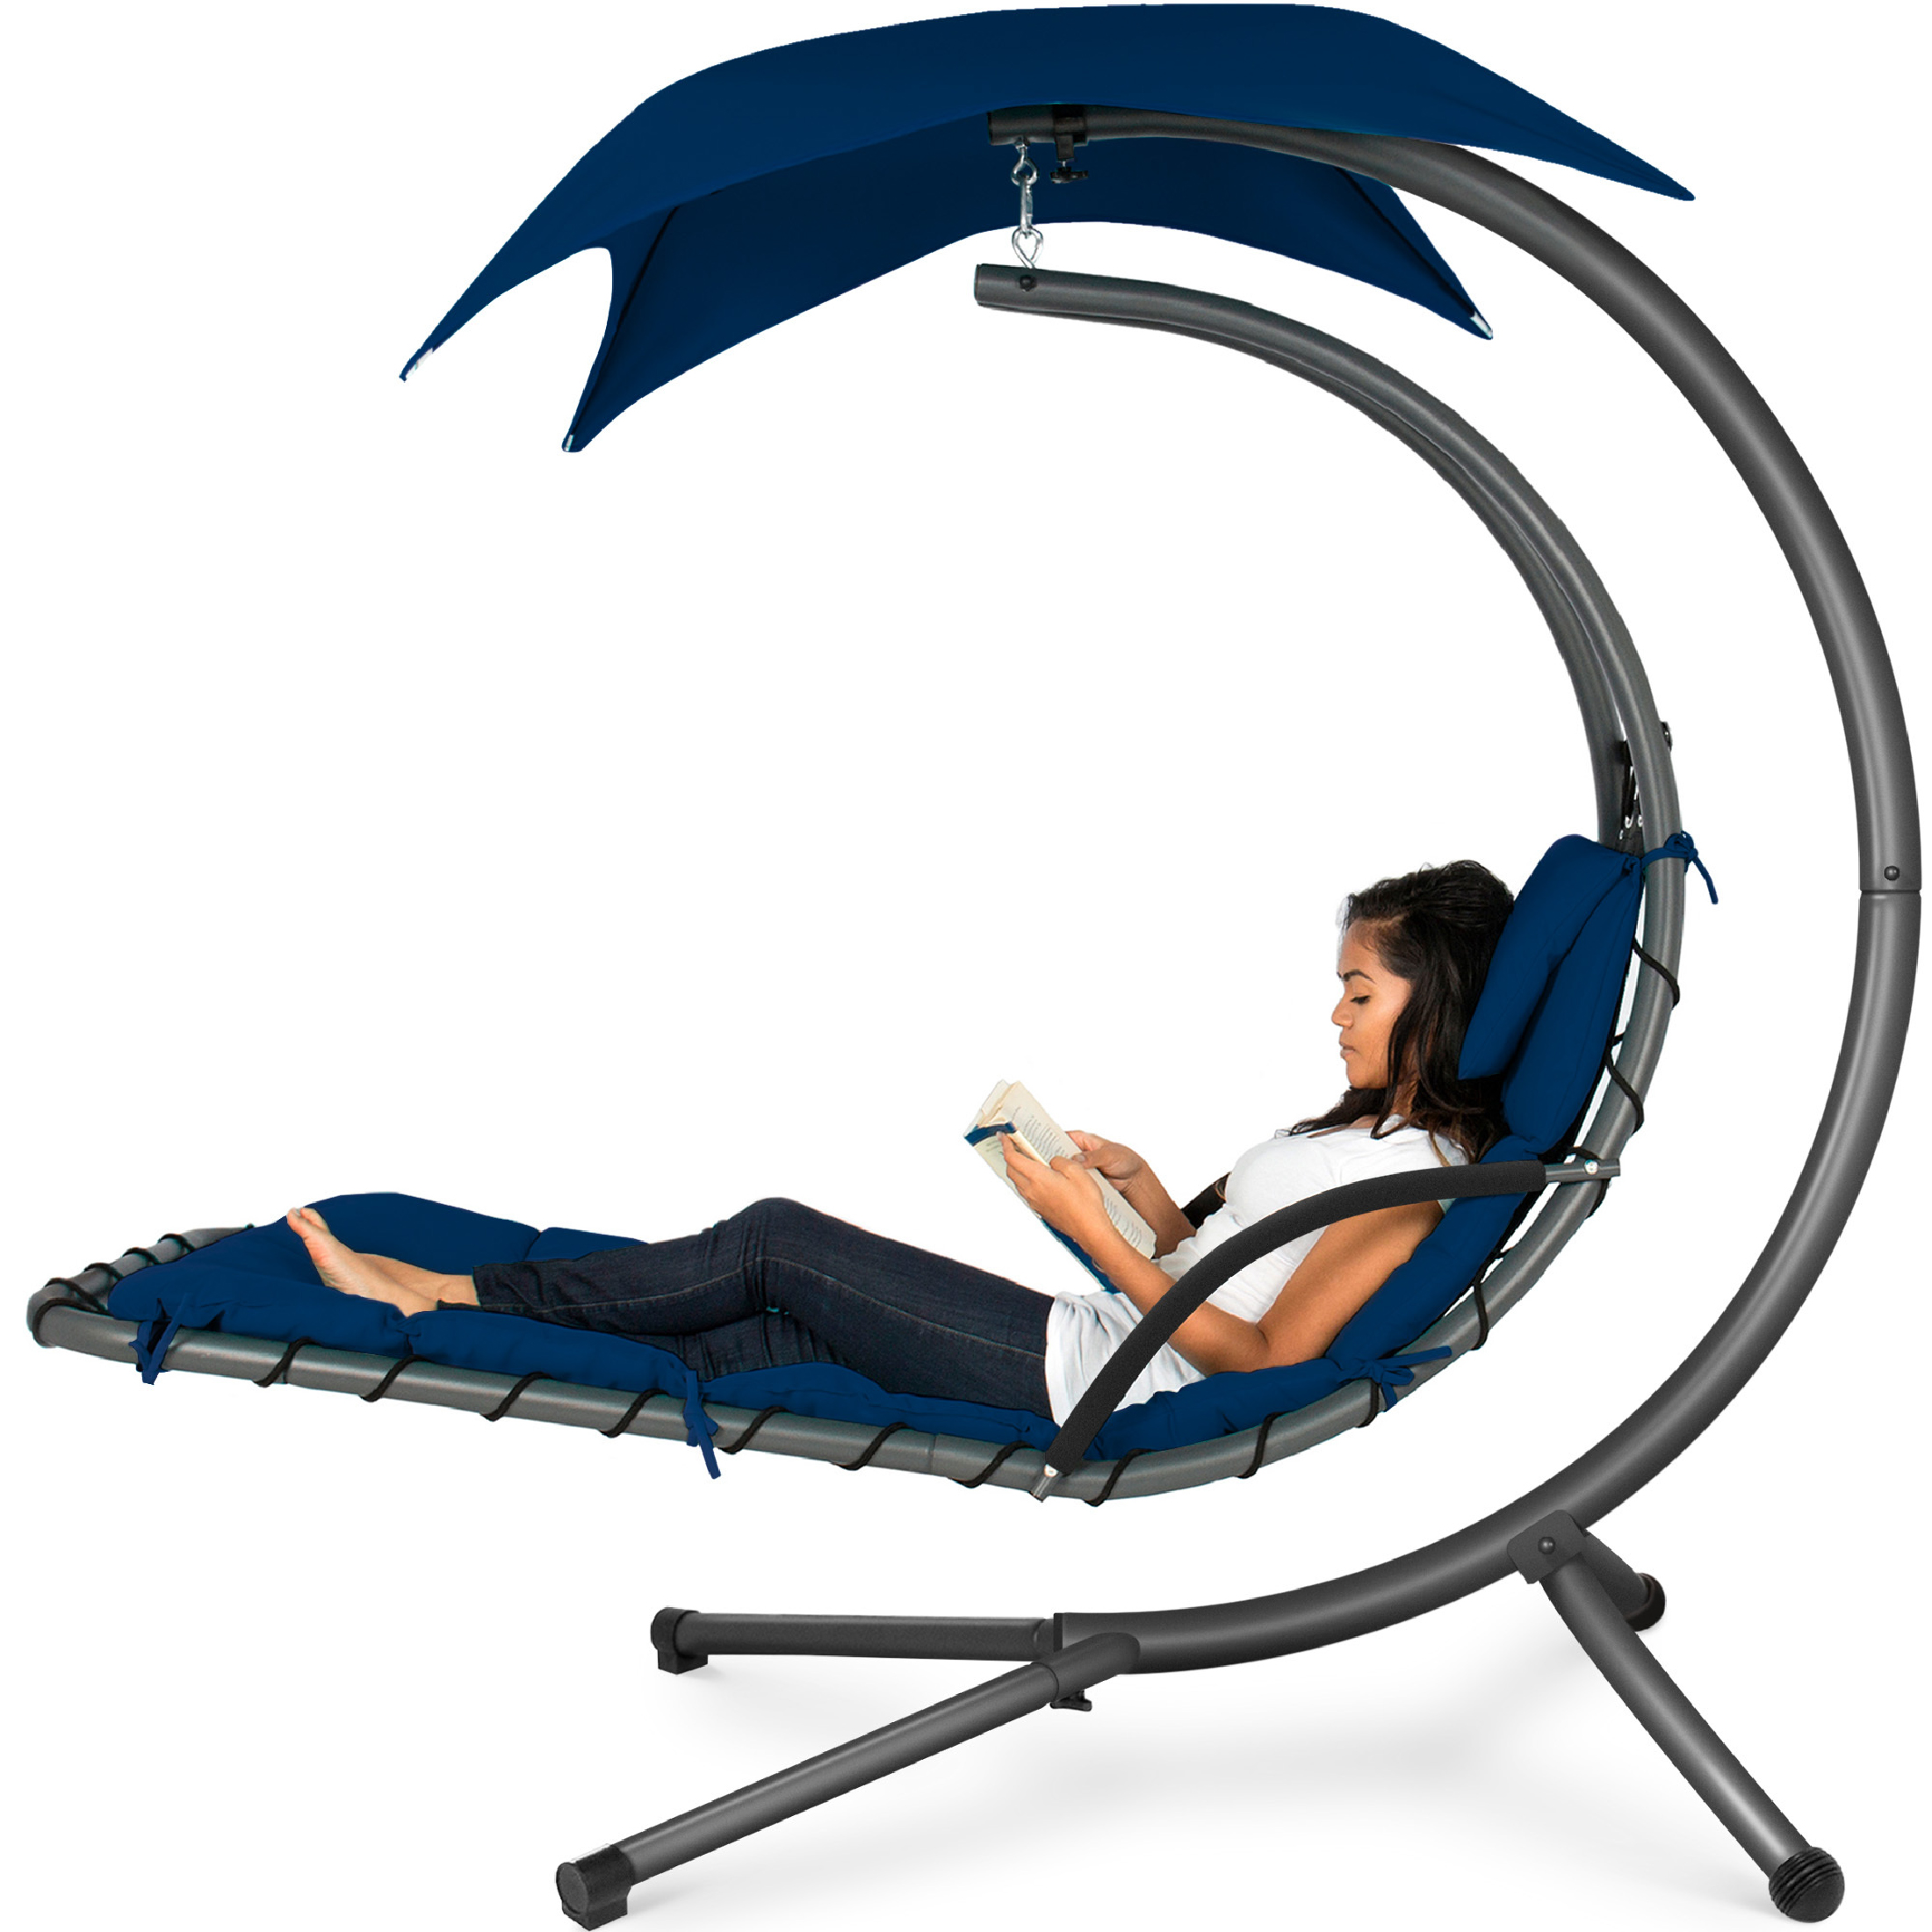 Best Choice Products Hanging Curved Chaise Lounge Chair Swing for Backyard, Patio w/ Pillow, Shade, Stand - Navy Blue - image 1 of 8